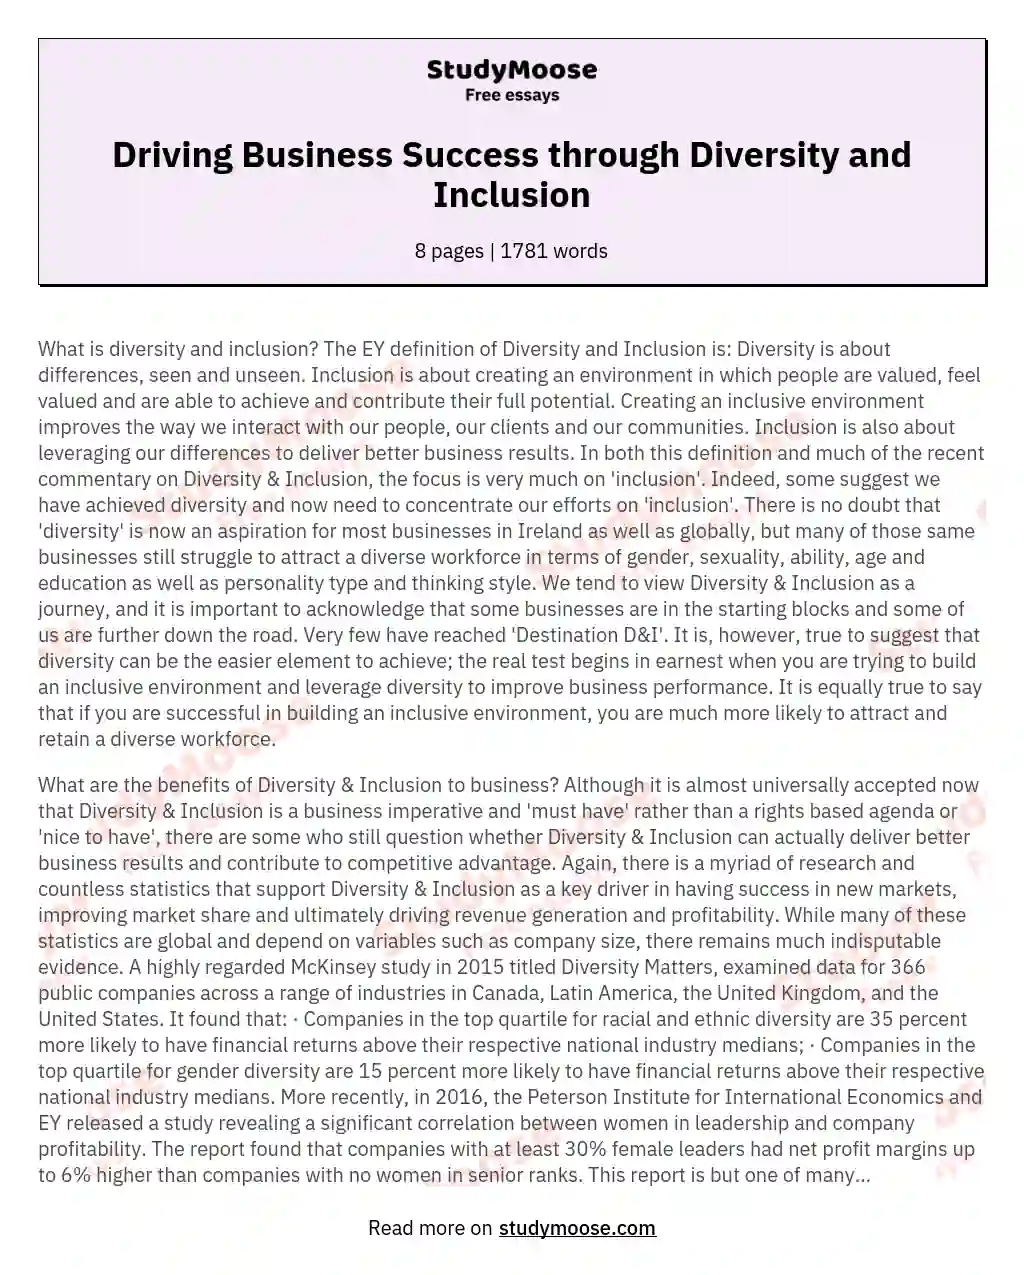 Driving Business Success through Diversity and Inclusion essay